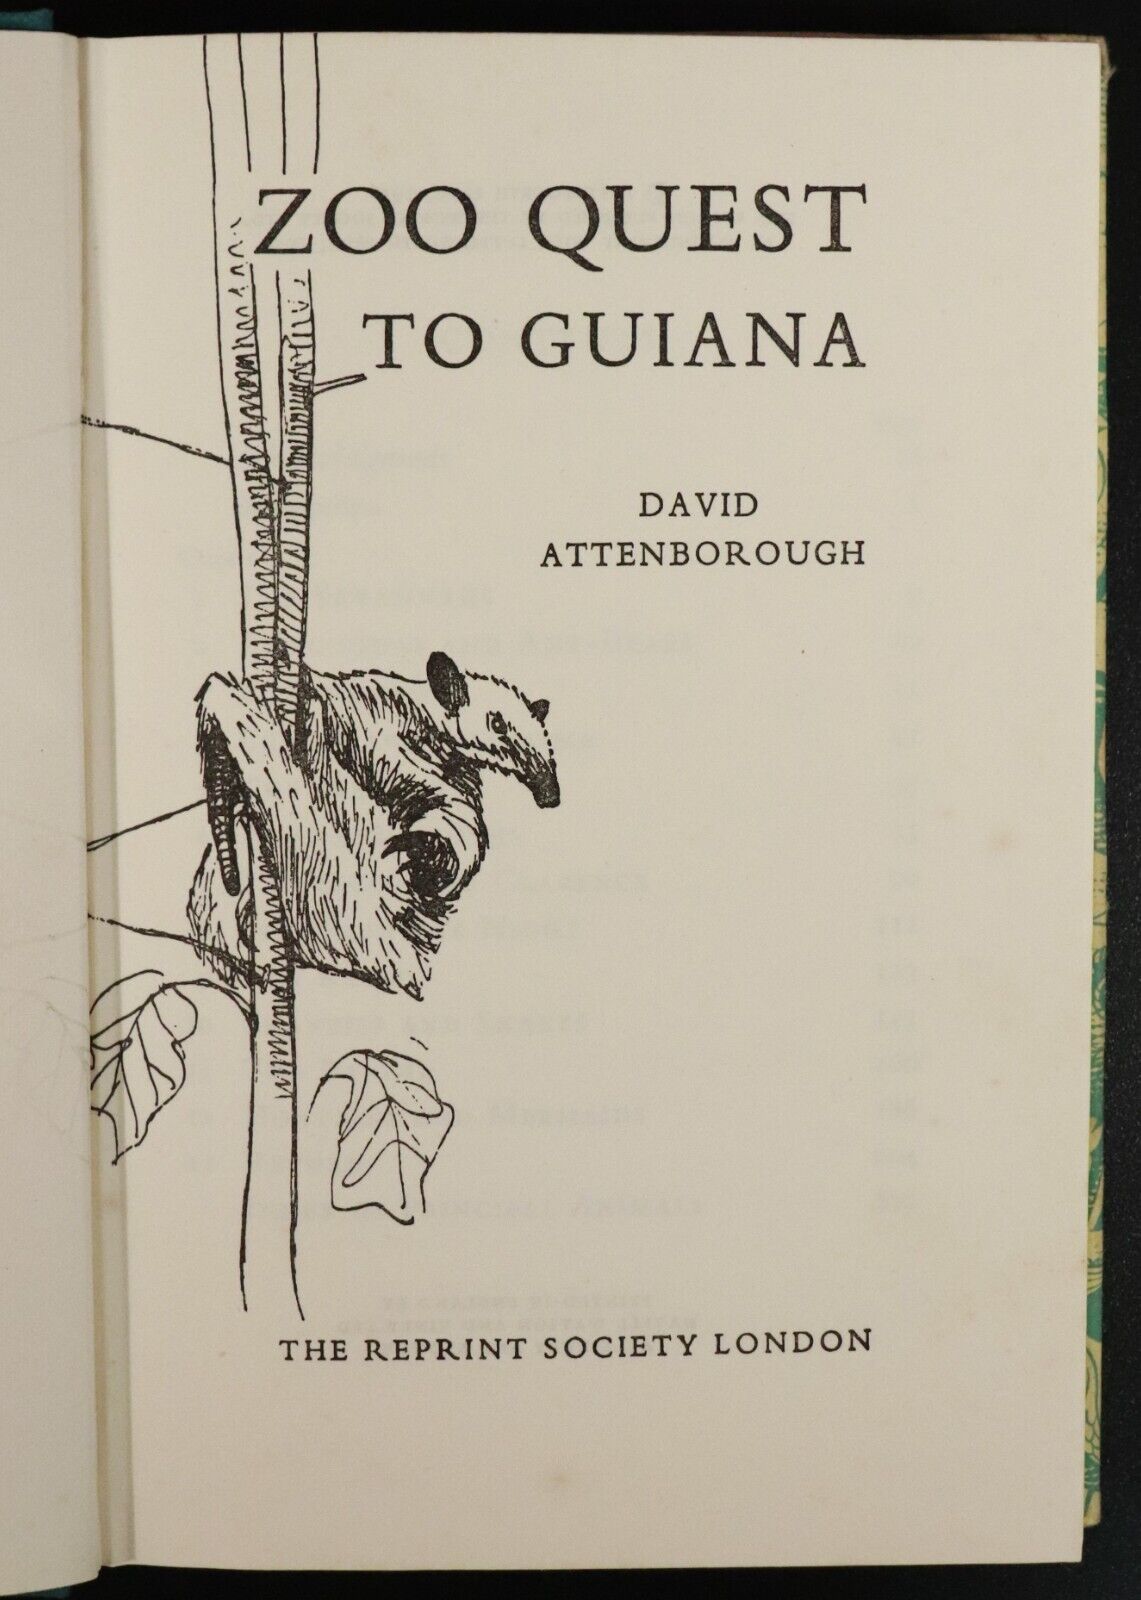 1958 Zoo Quest To Guiana by D Attenborough Natural History Book Reprint Society - 0